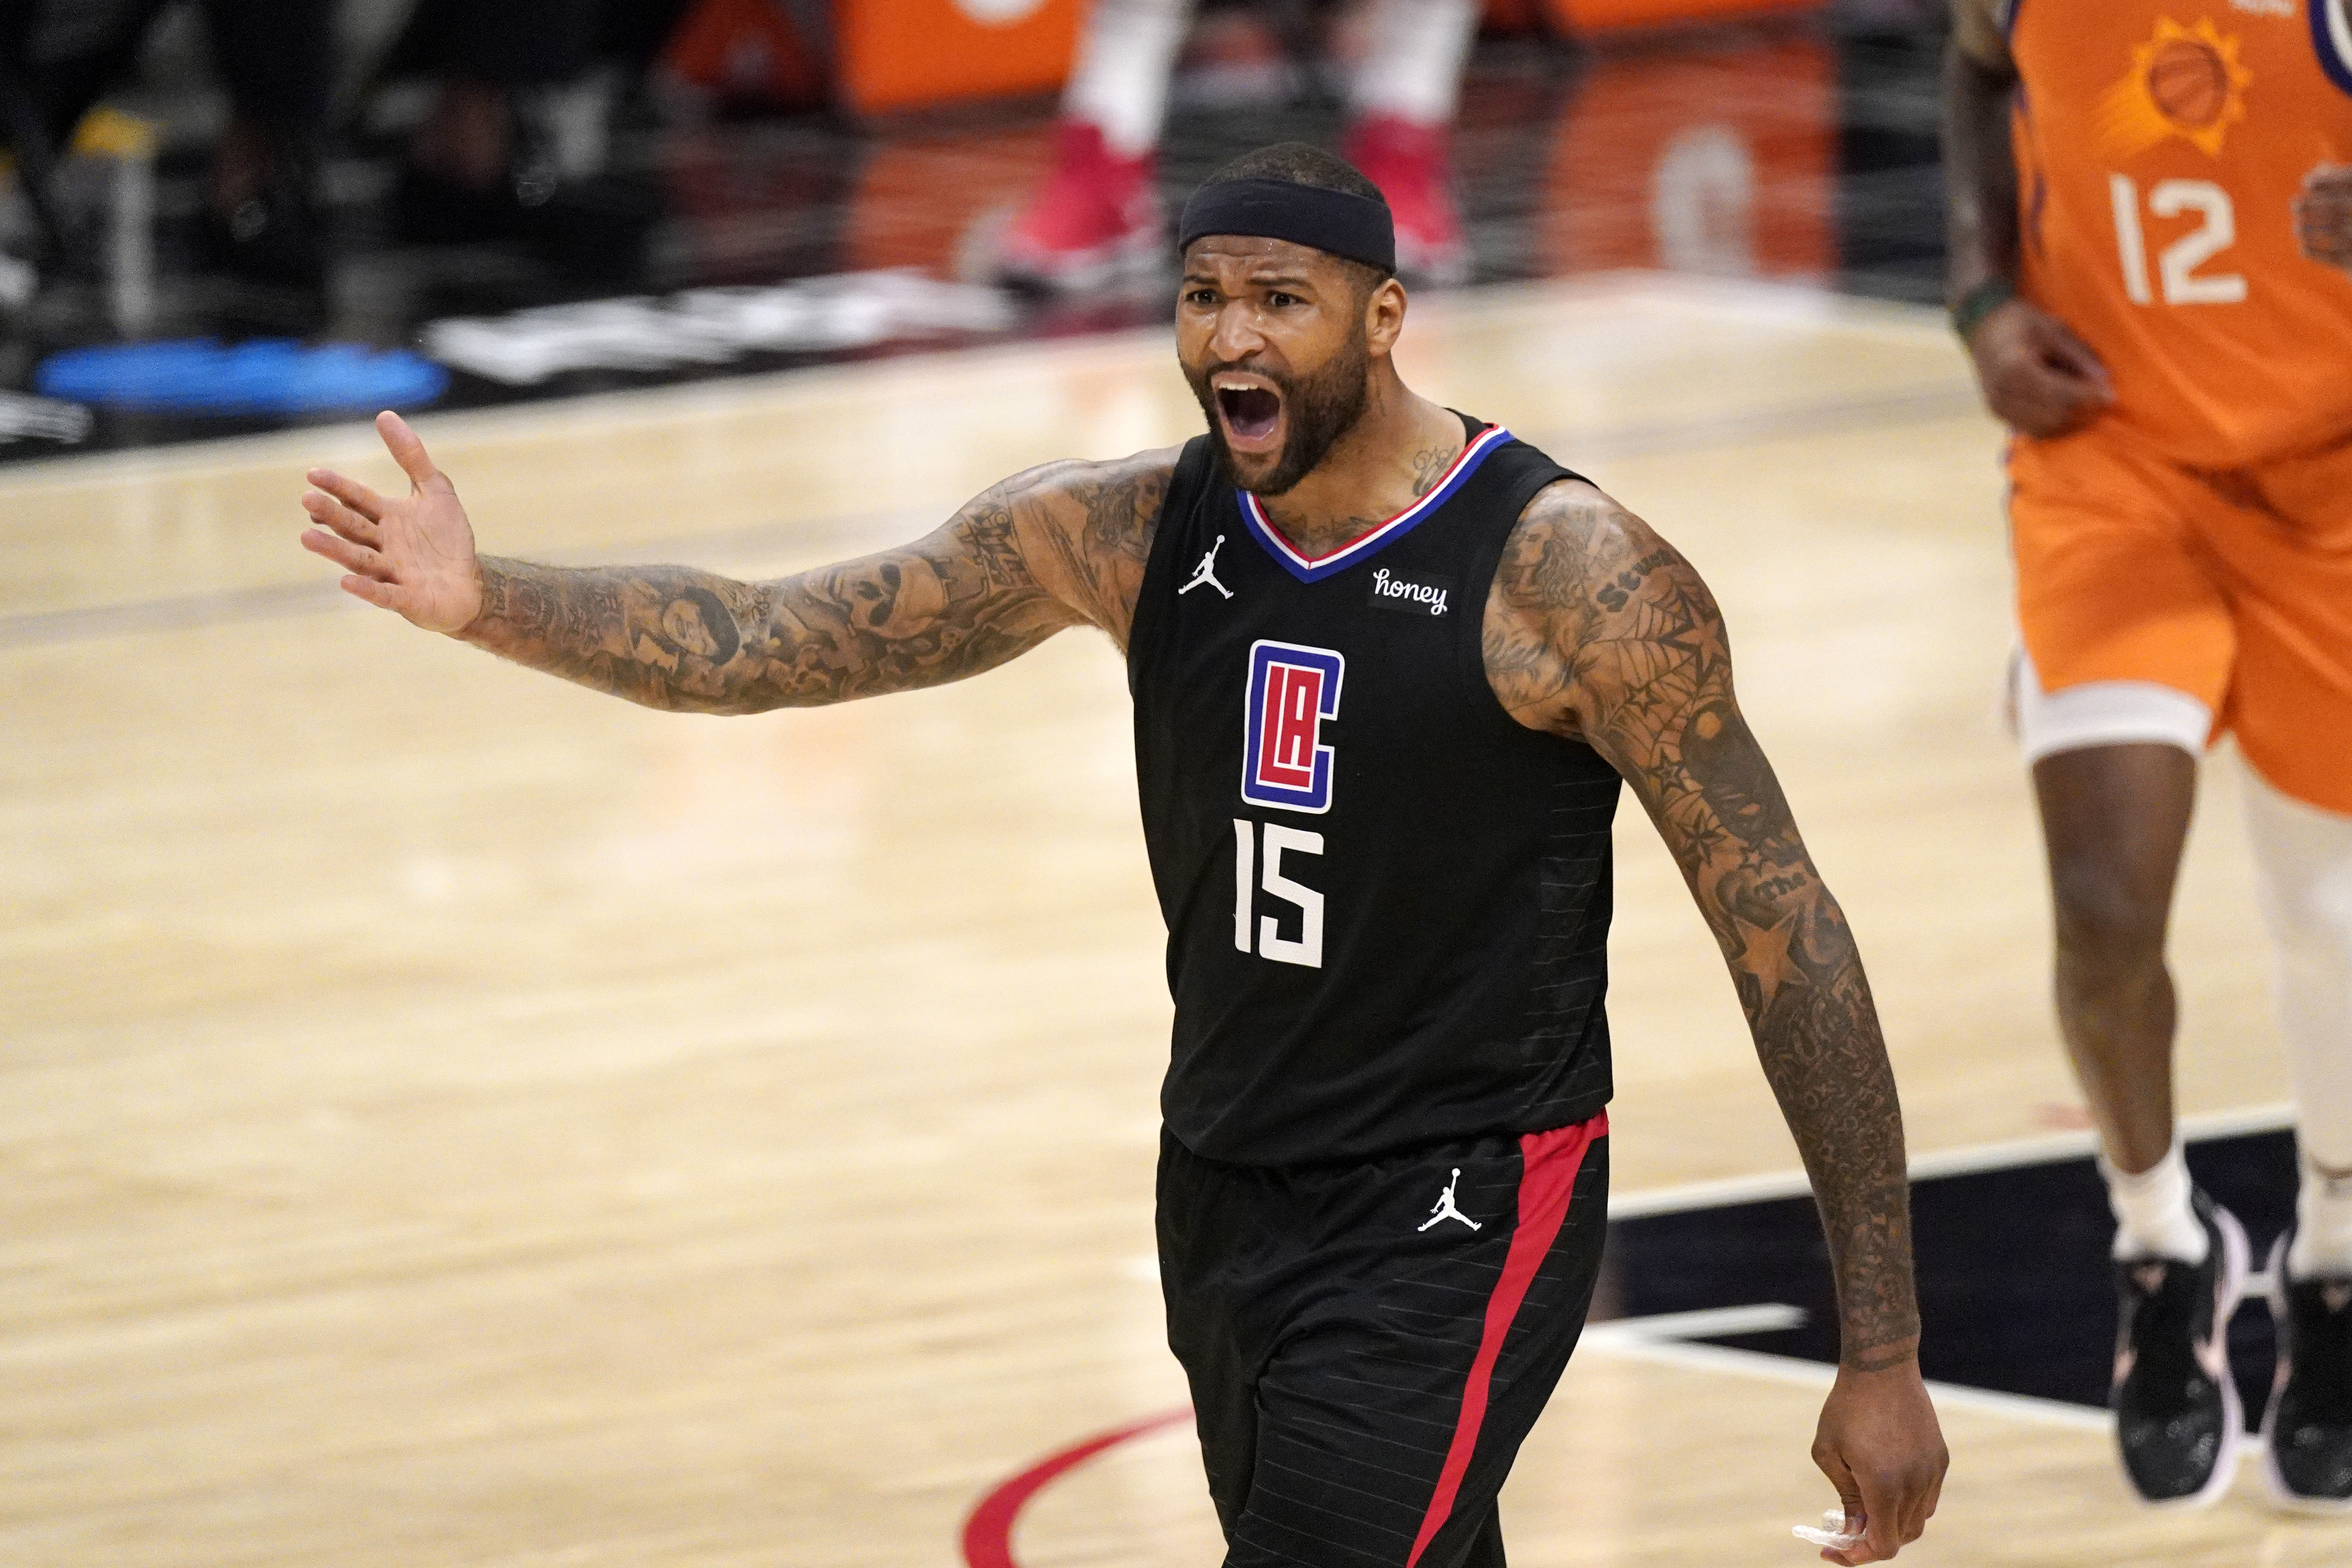 DeMarcus Cousins set to sign non-guaranteed contract with Bucks